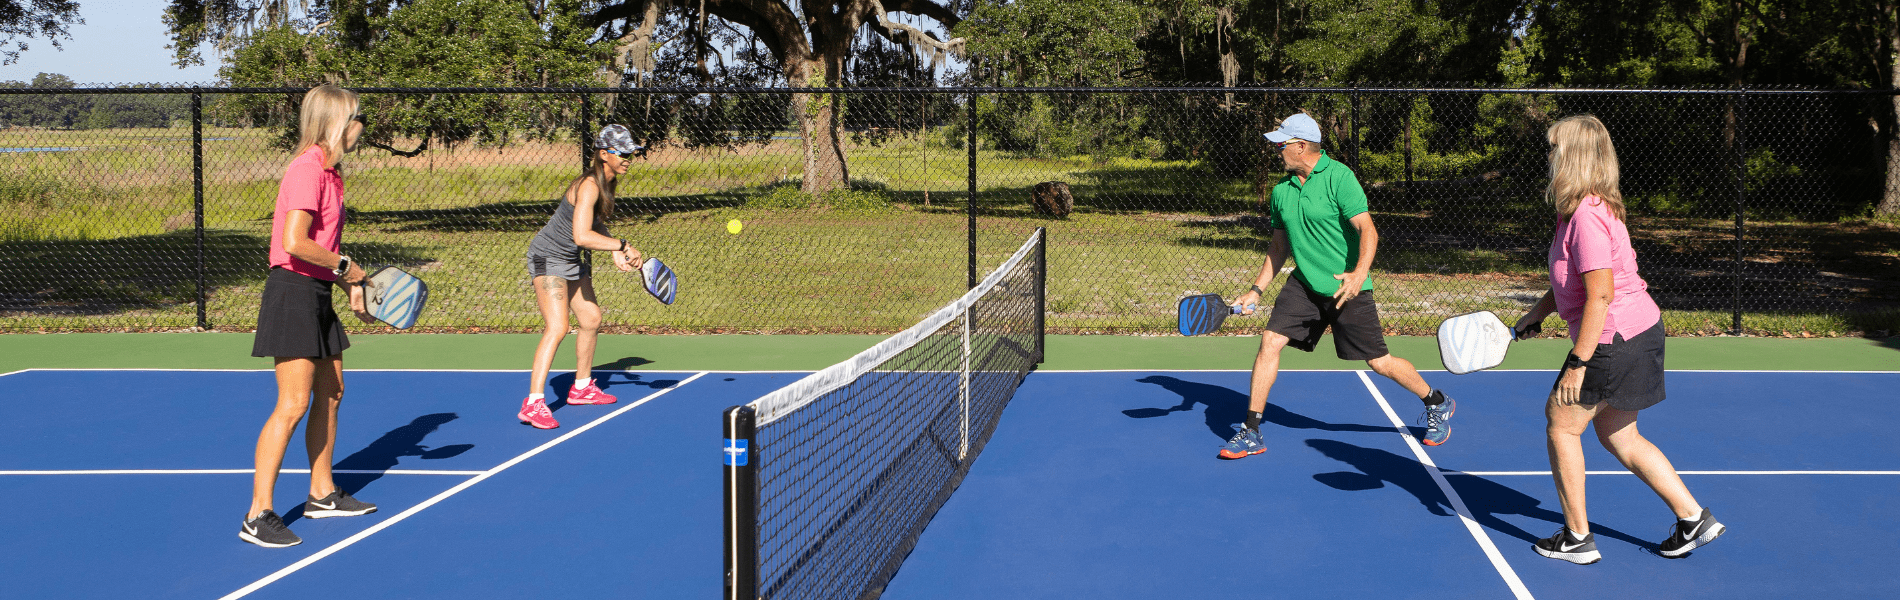 Residents at Lakeshore enjoy playing pickleball on the community courts.